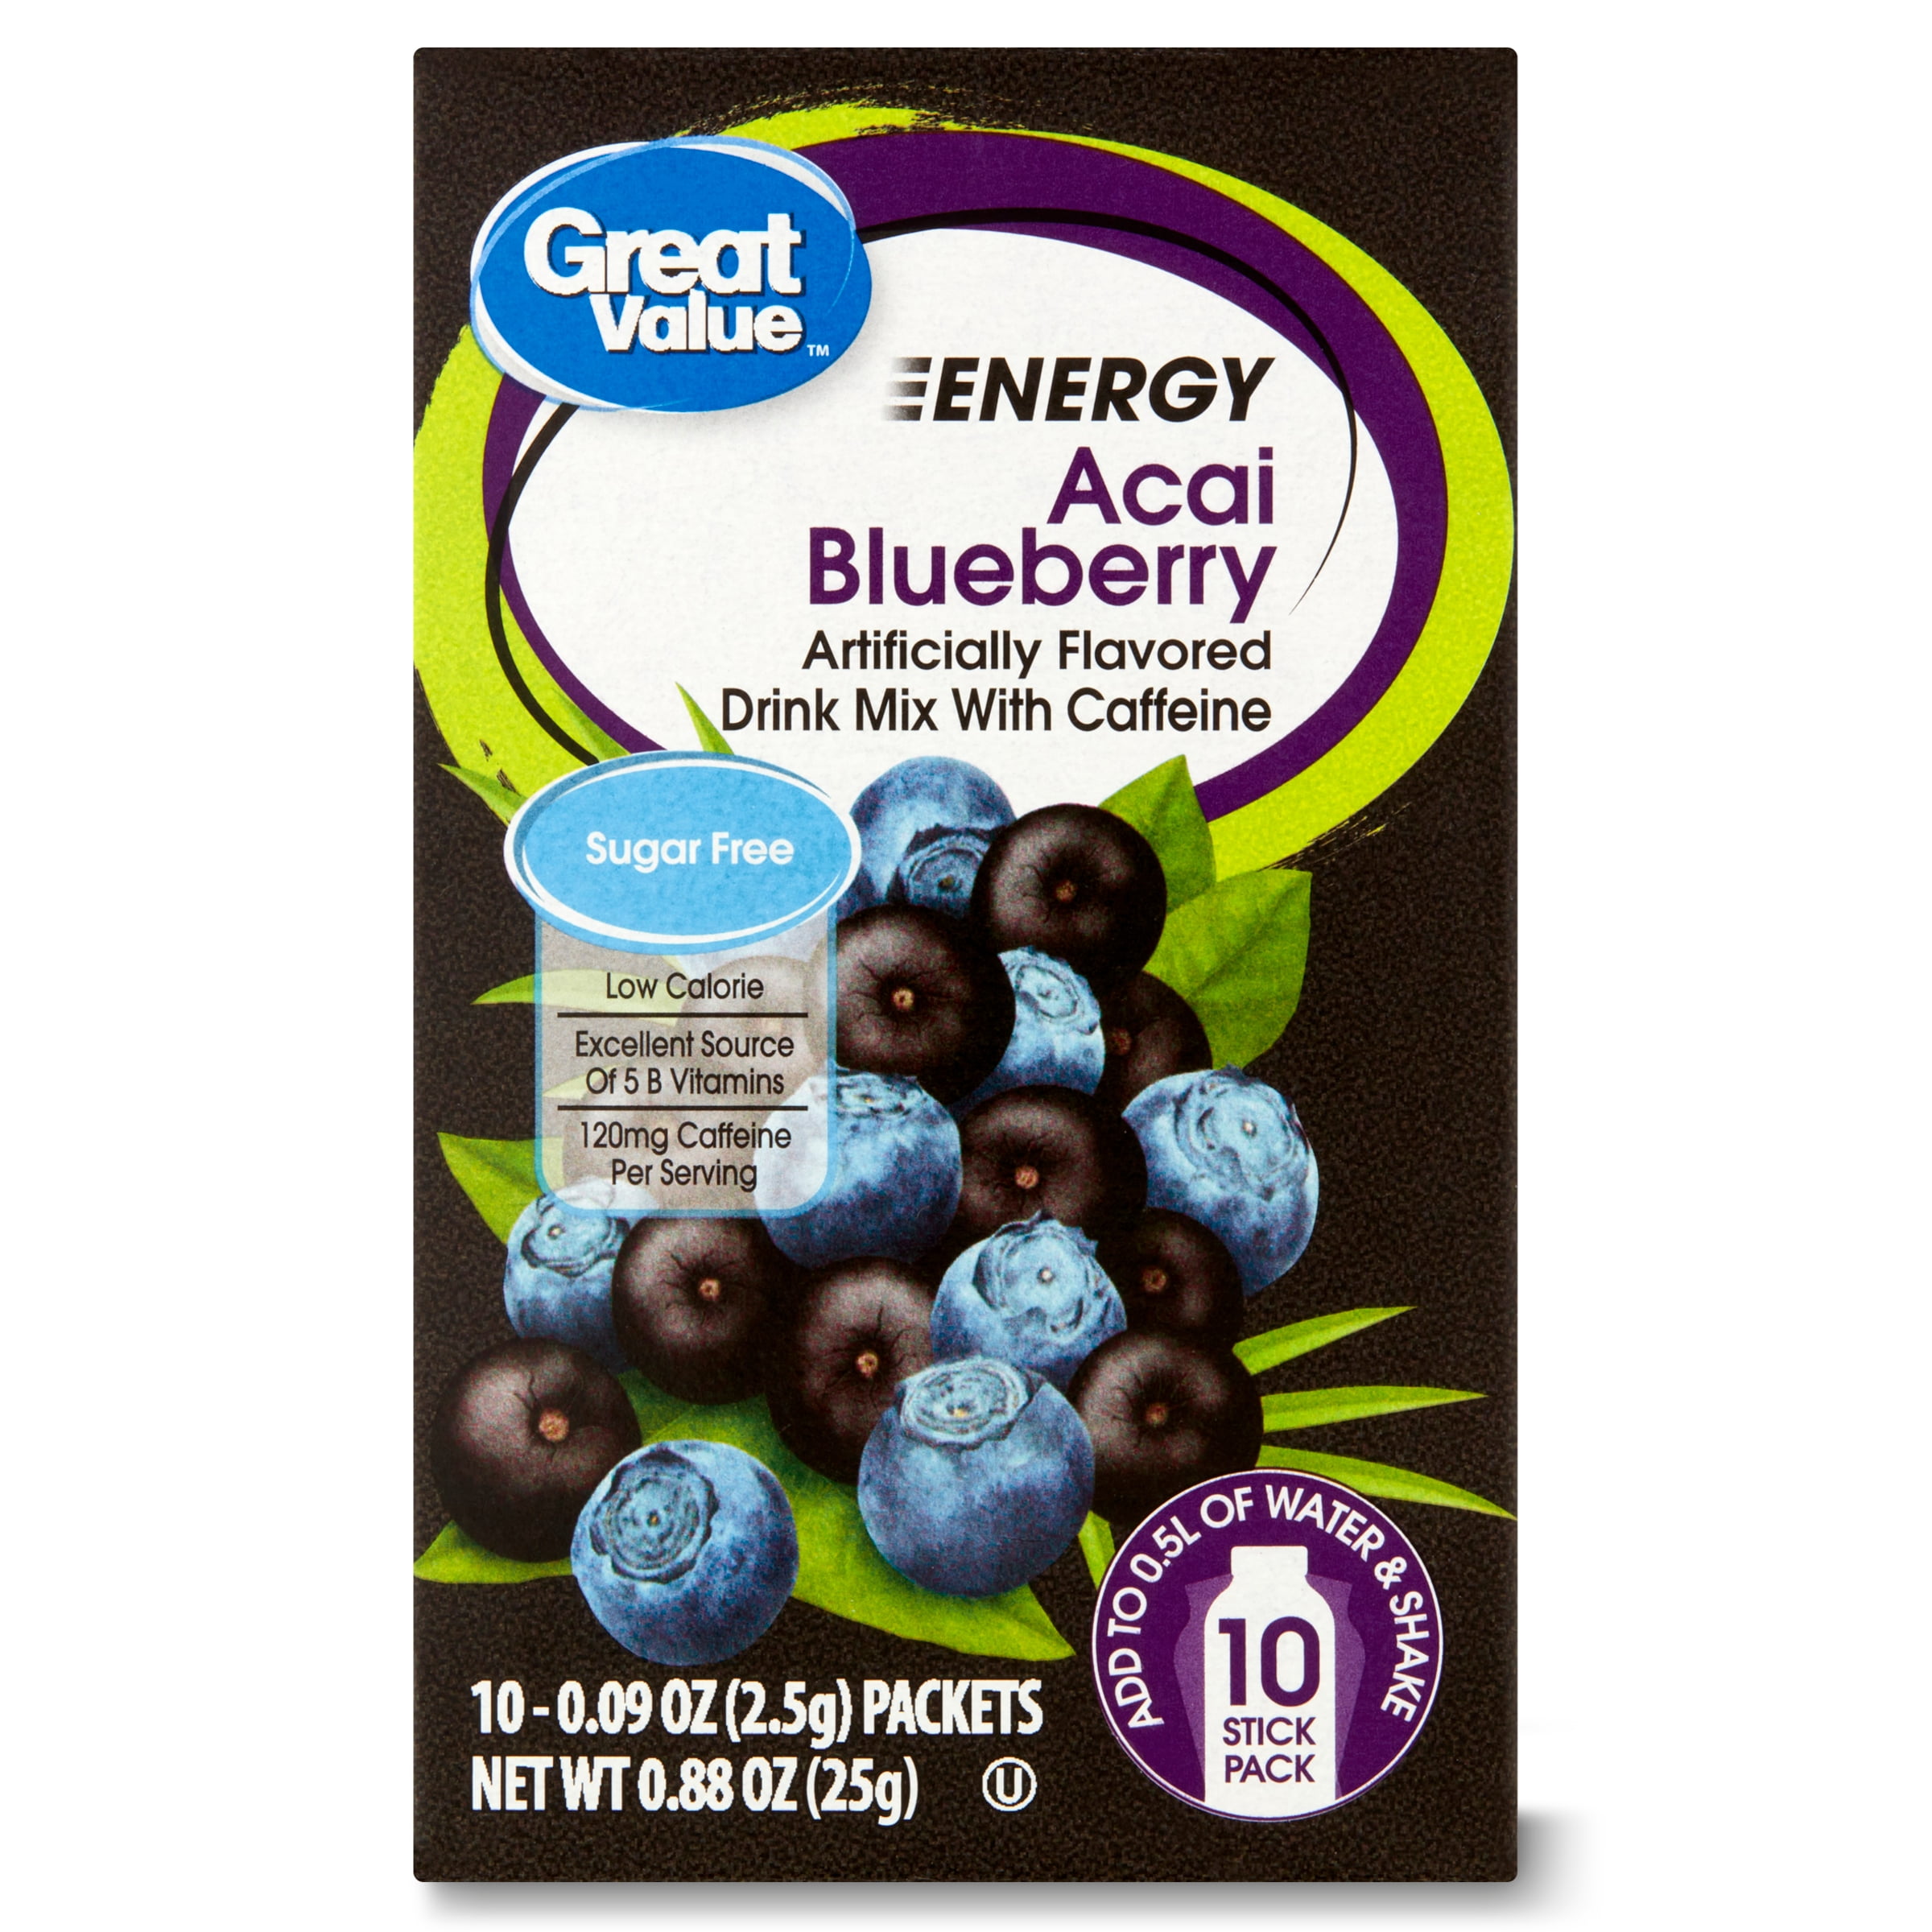 Great Value Sugar-Free Energy Acai Blueberry Drink Mix, 0.88 oz, 10 Count